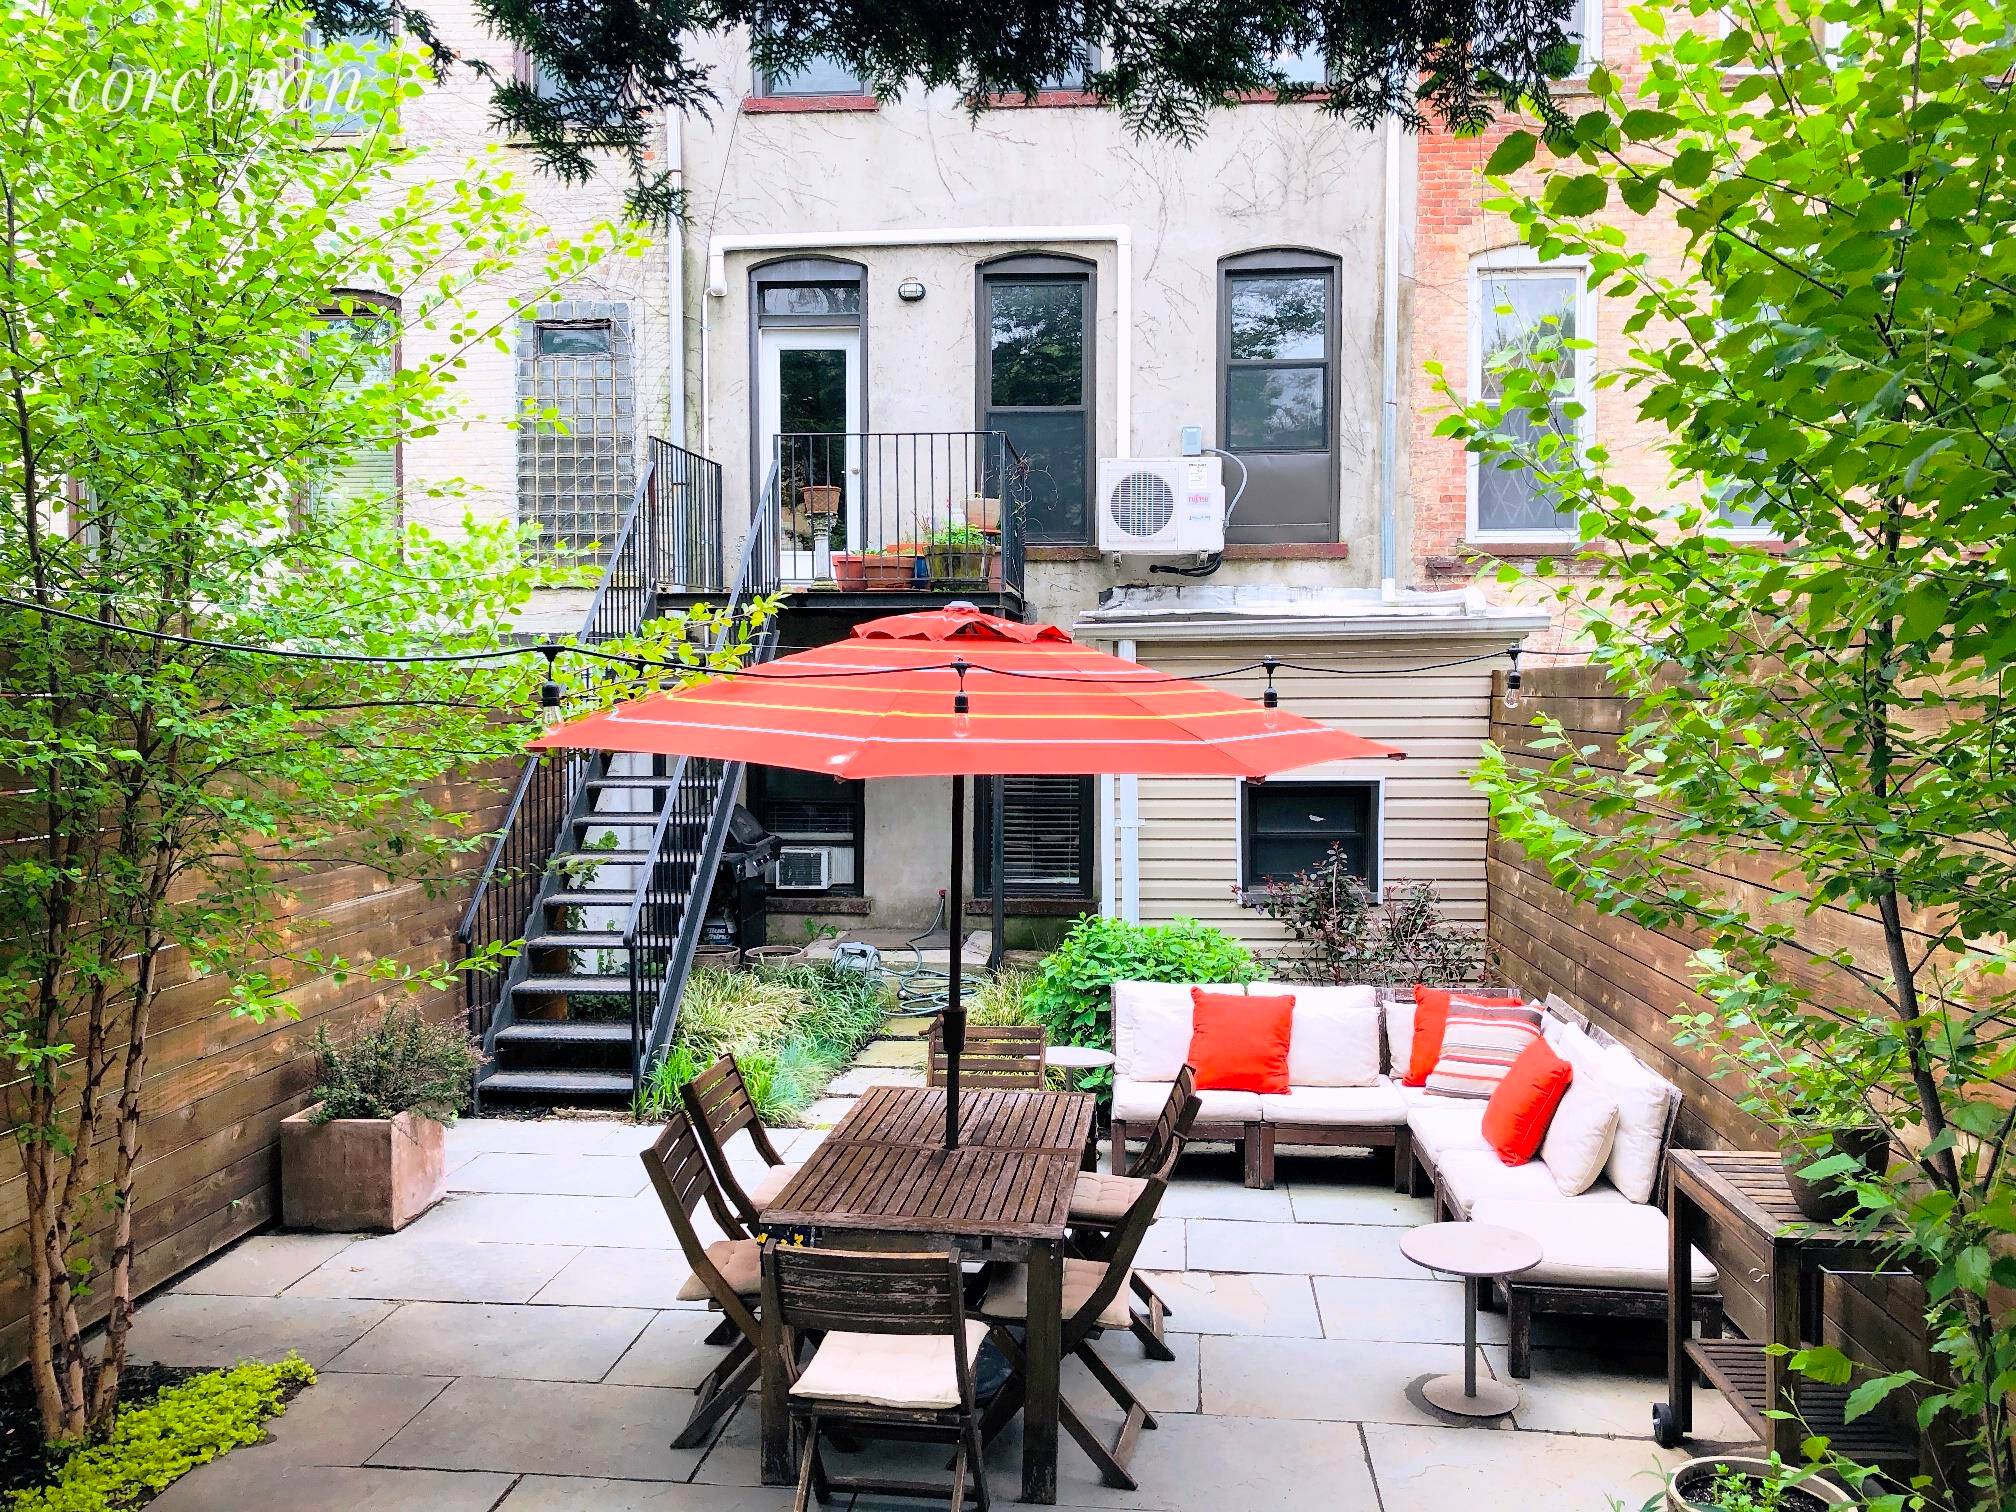 Three bedroom, two and a half bath 1650sf two floor home in historic Bedford Stuyvesant.